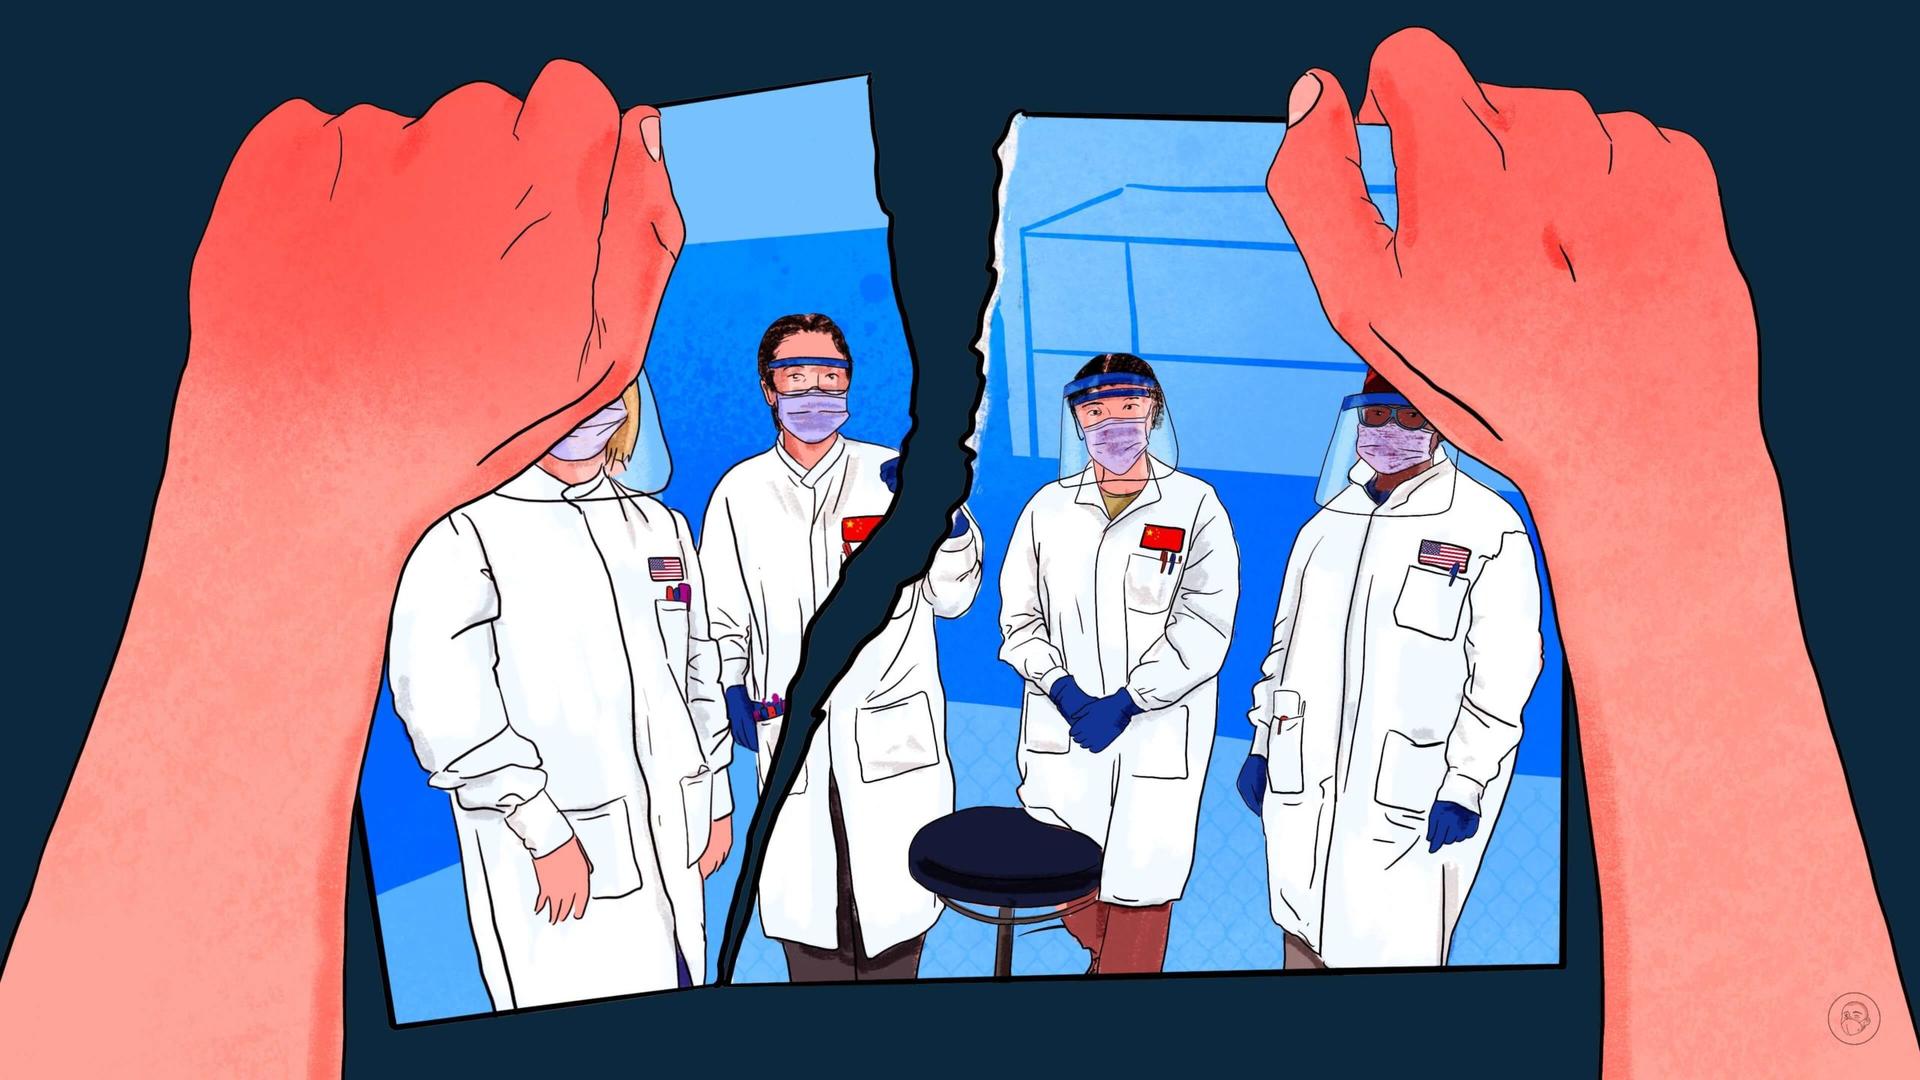 An illustration by Alex Santafe depicting 2 hands breaking a picture of a group of American and Chinese scientists posing